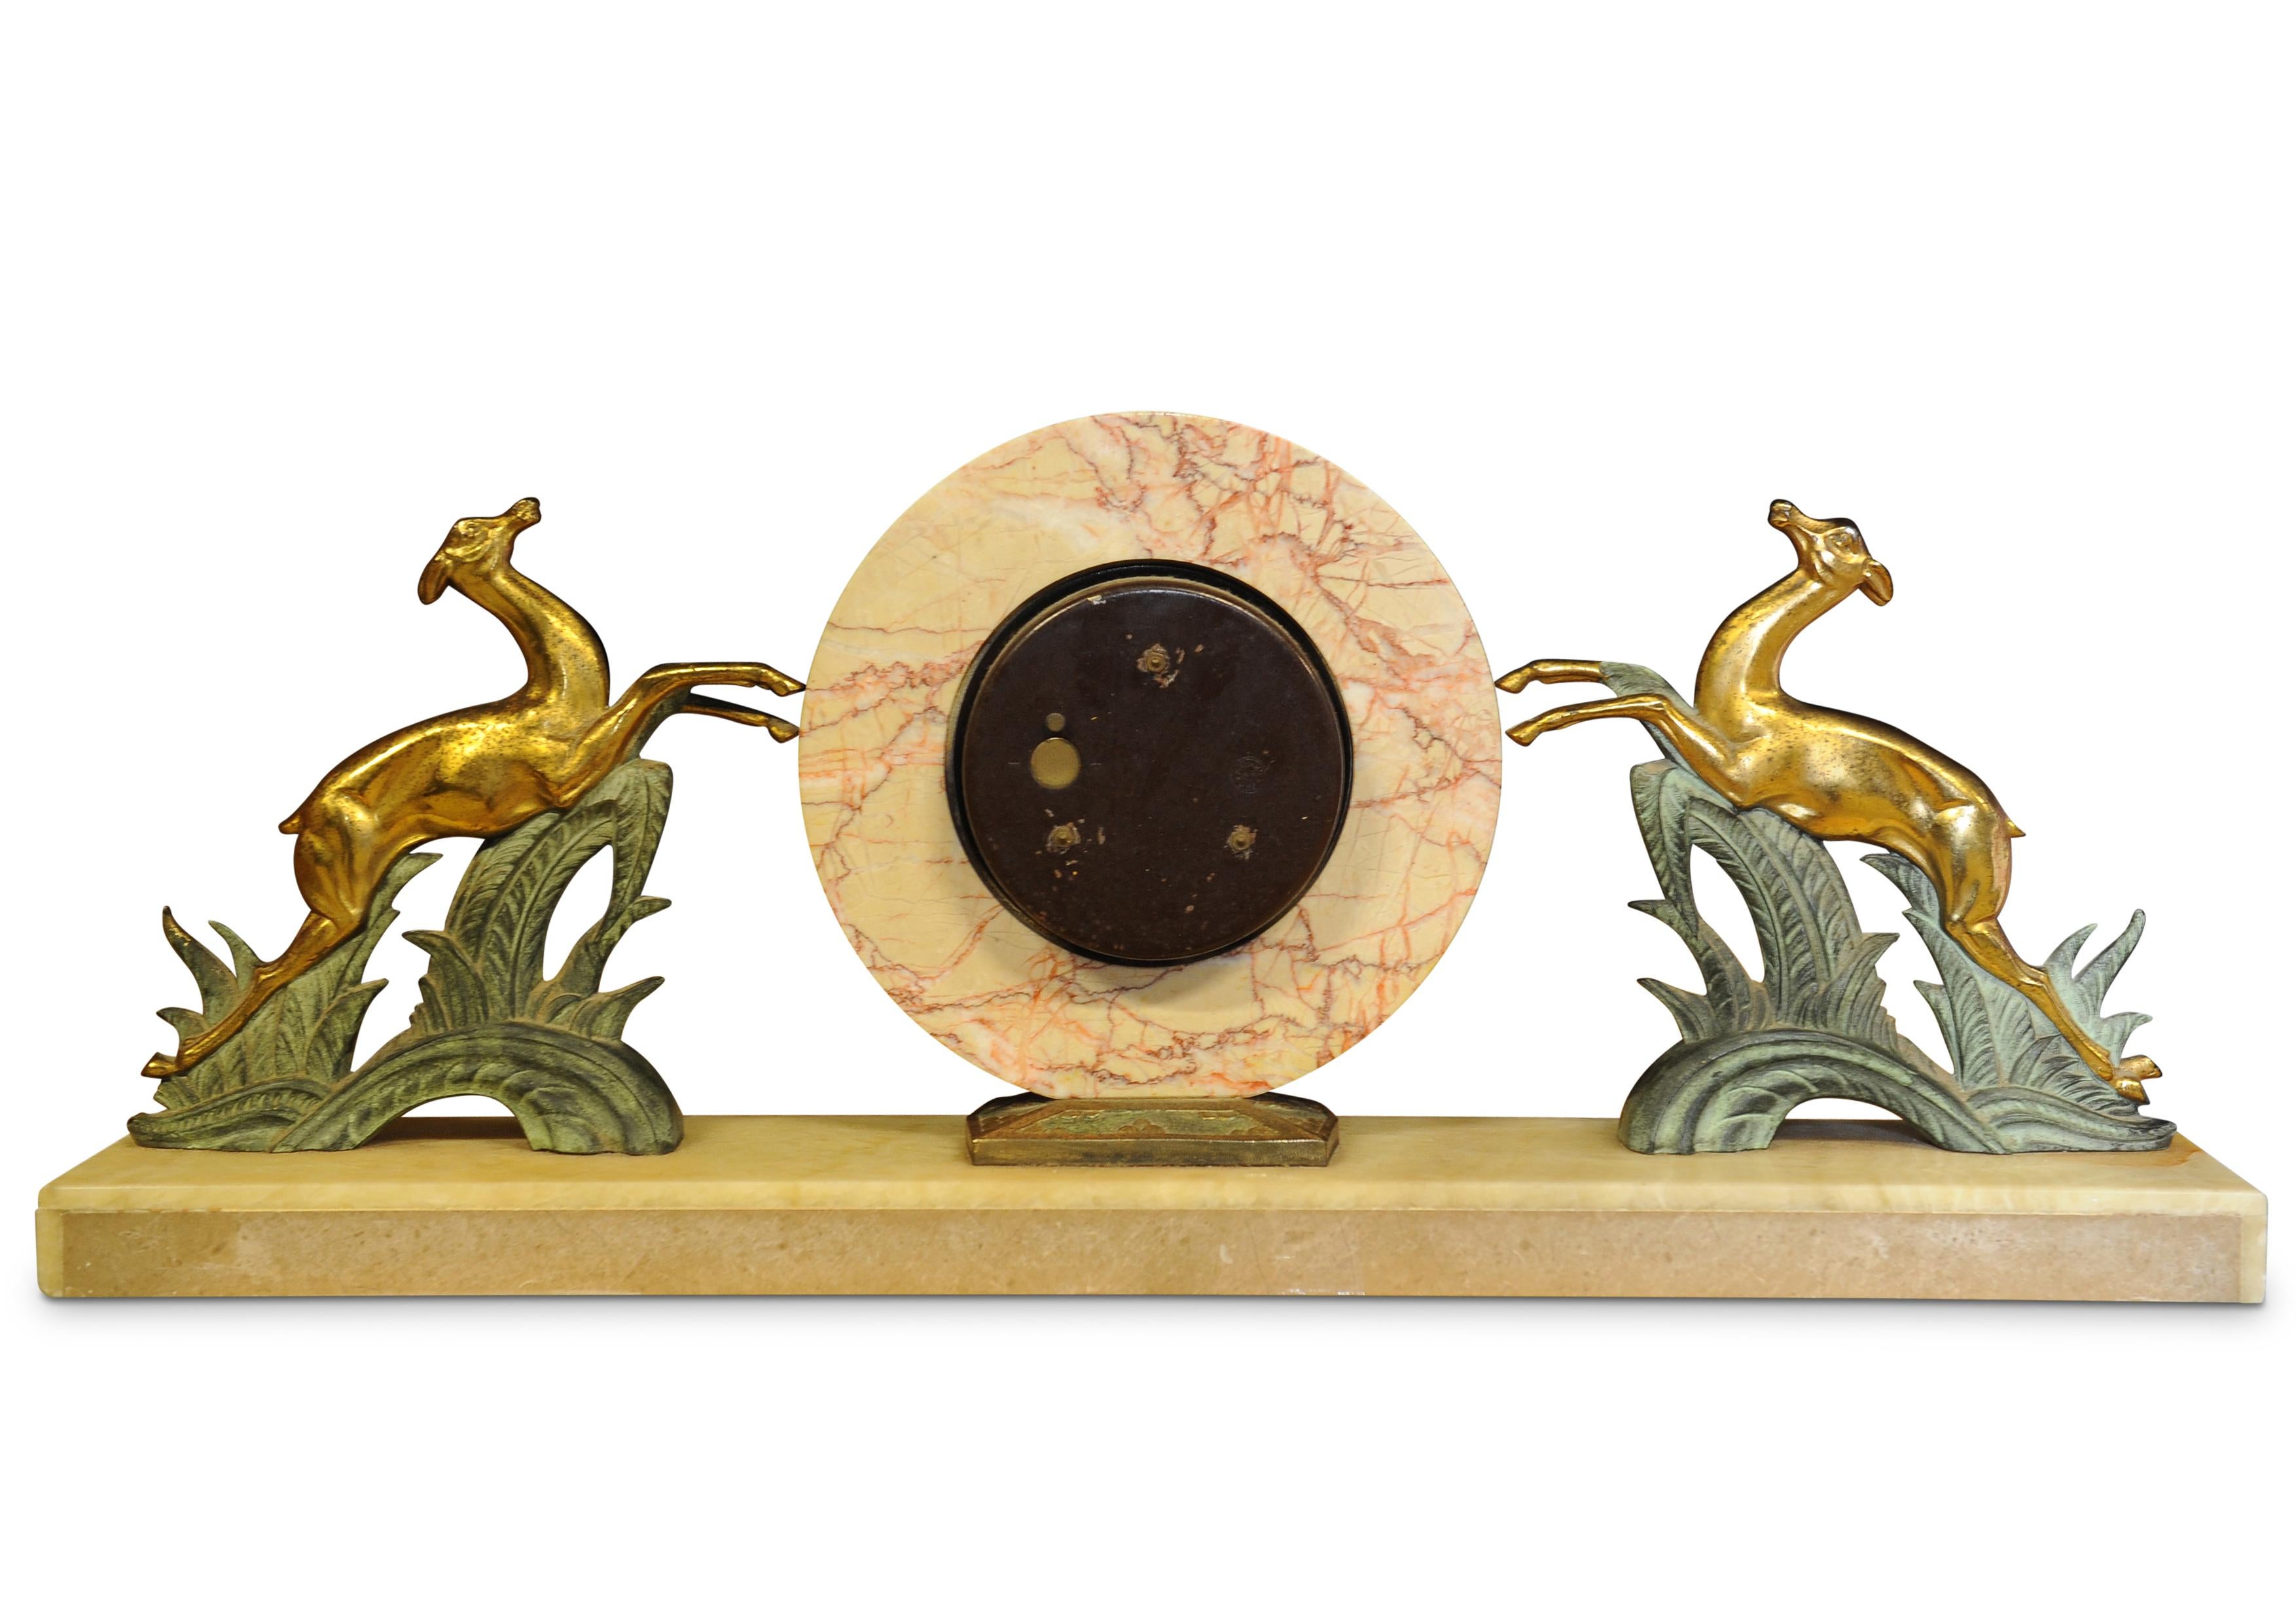 European Art Deco Marble and Onyx Mantel Clock by Albert Villon for Bayard 1930s  For Sale